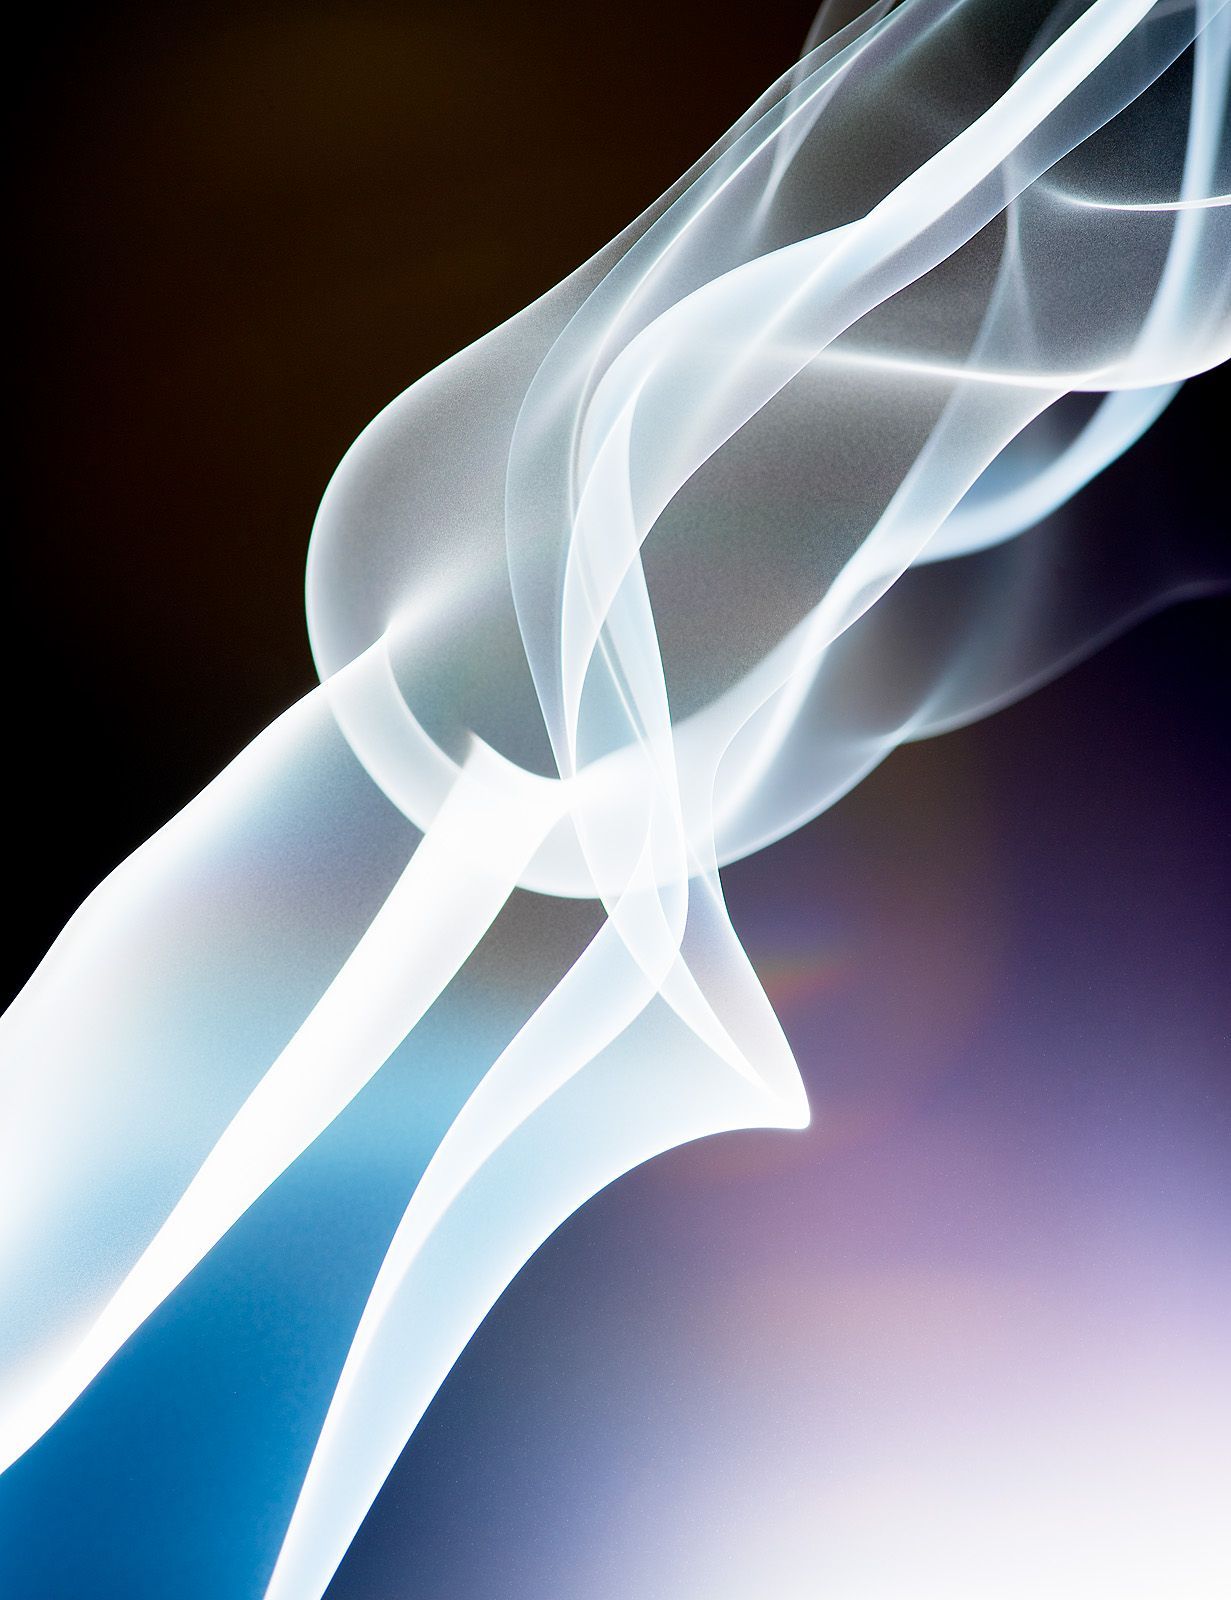 Single frame of incense smoke in a commission dedicated to a former art instructor.